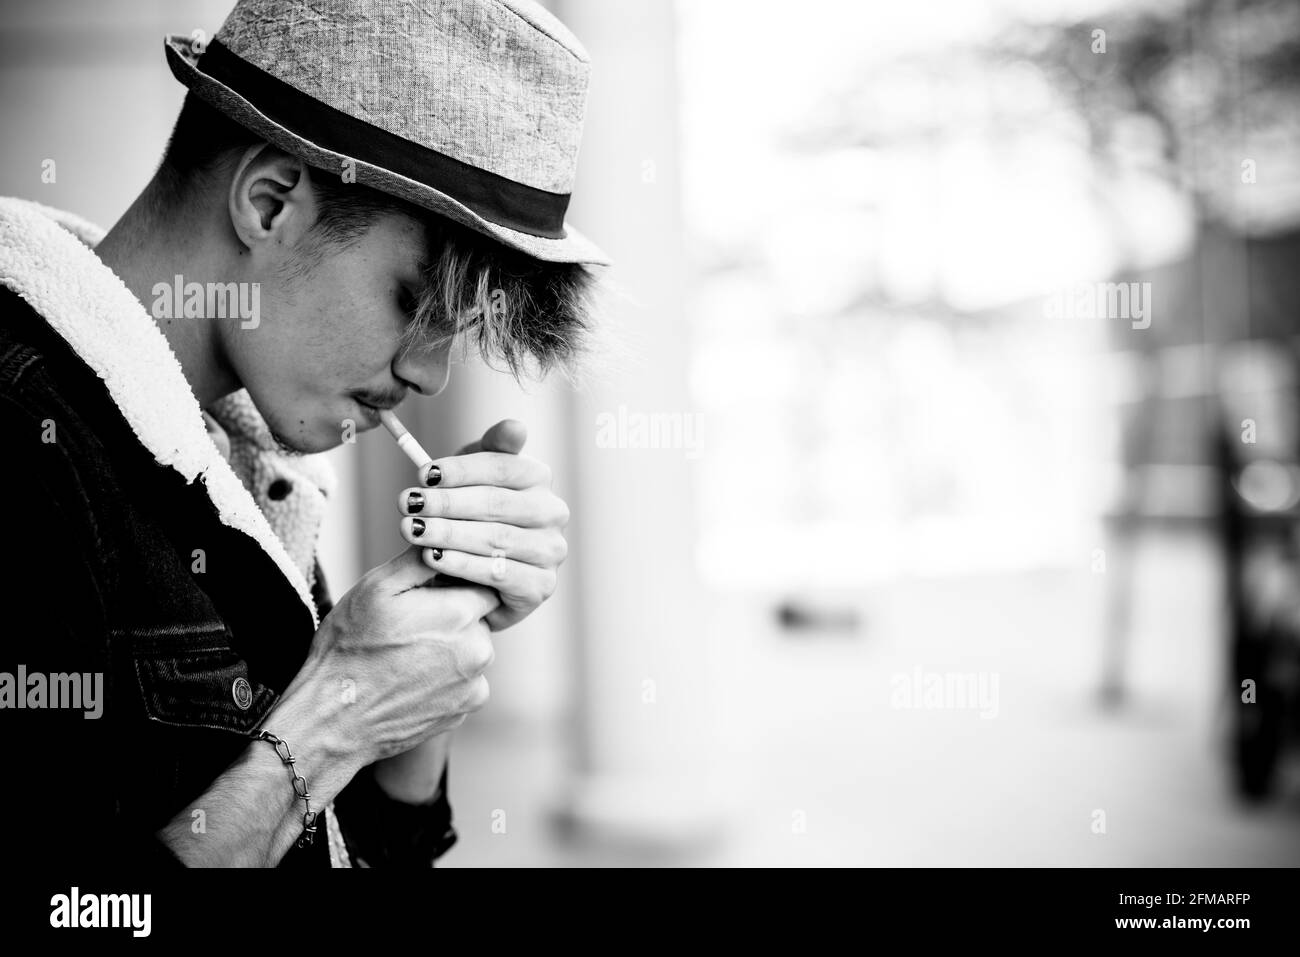 Black and white young boy teenager portrait lighting a cigarette to smoke in youth age - un healthy lifestyle - cool alternative caucasian hispanic guy lifestyle Stock Photo